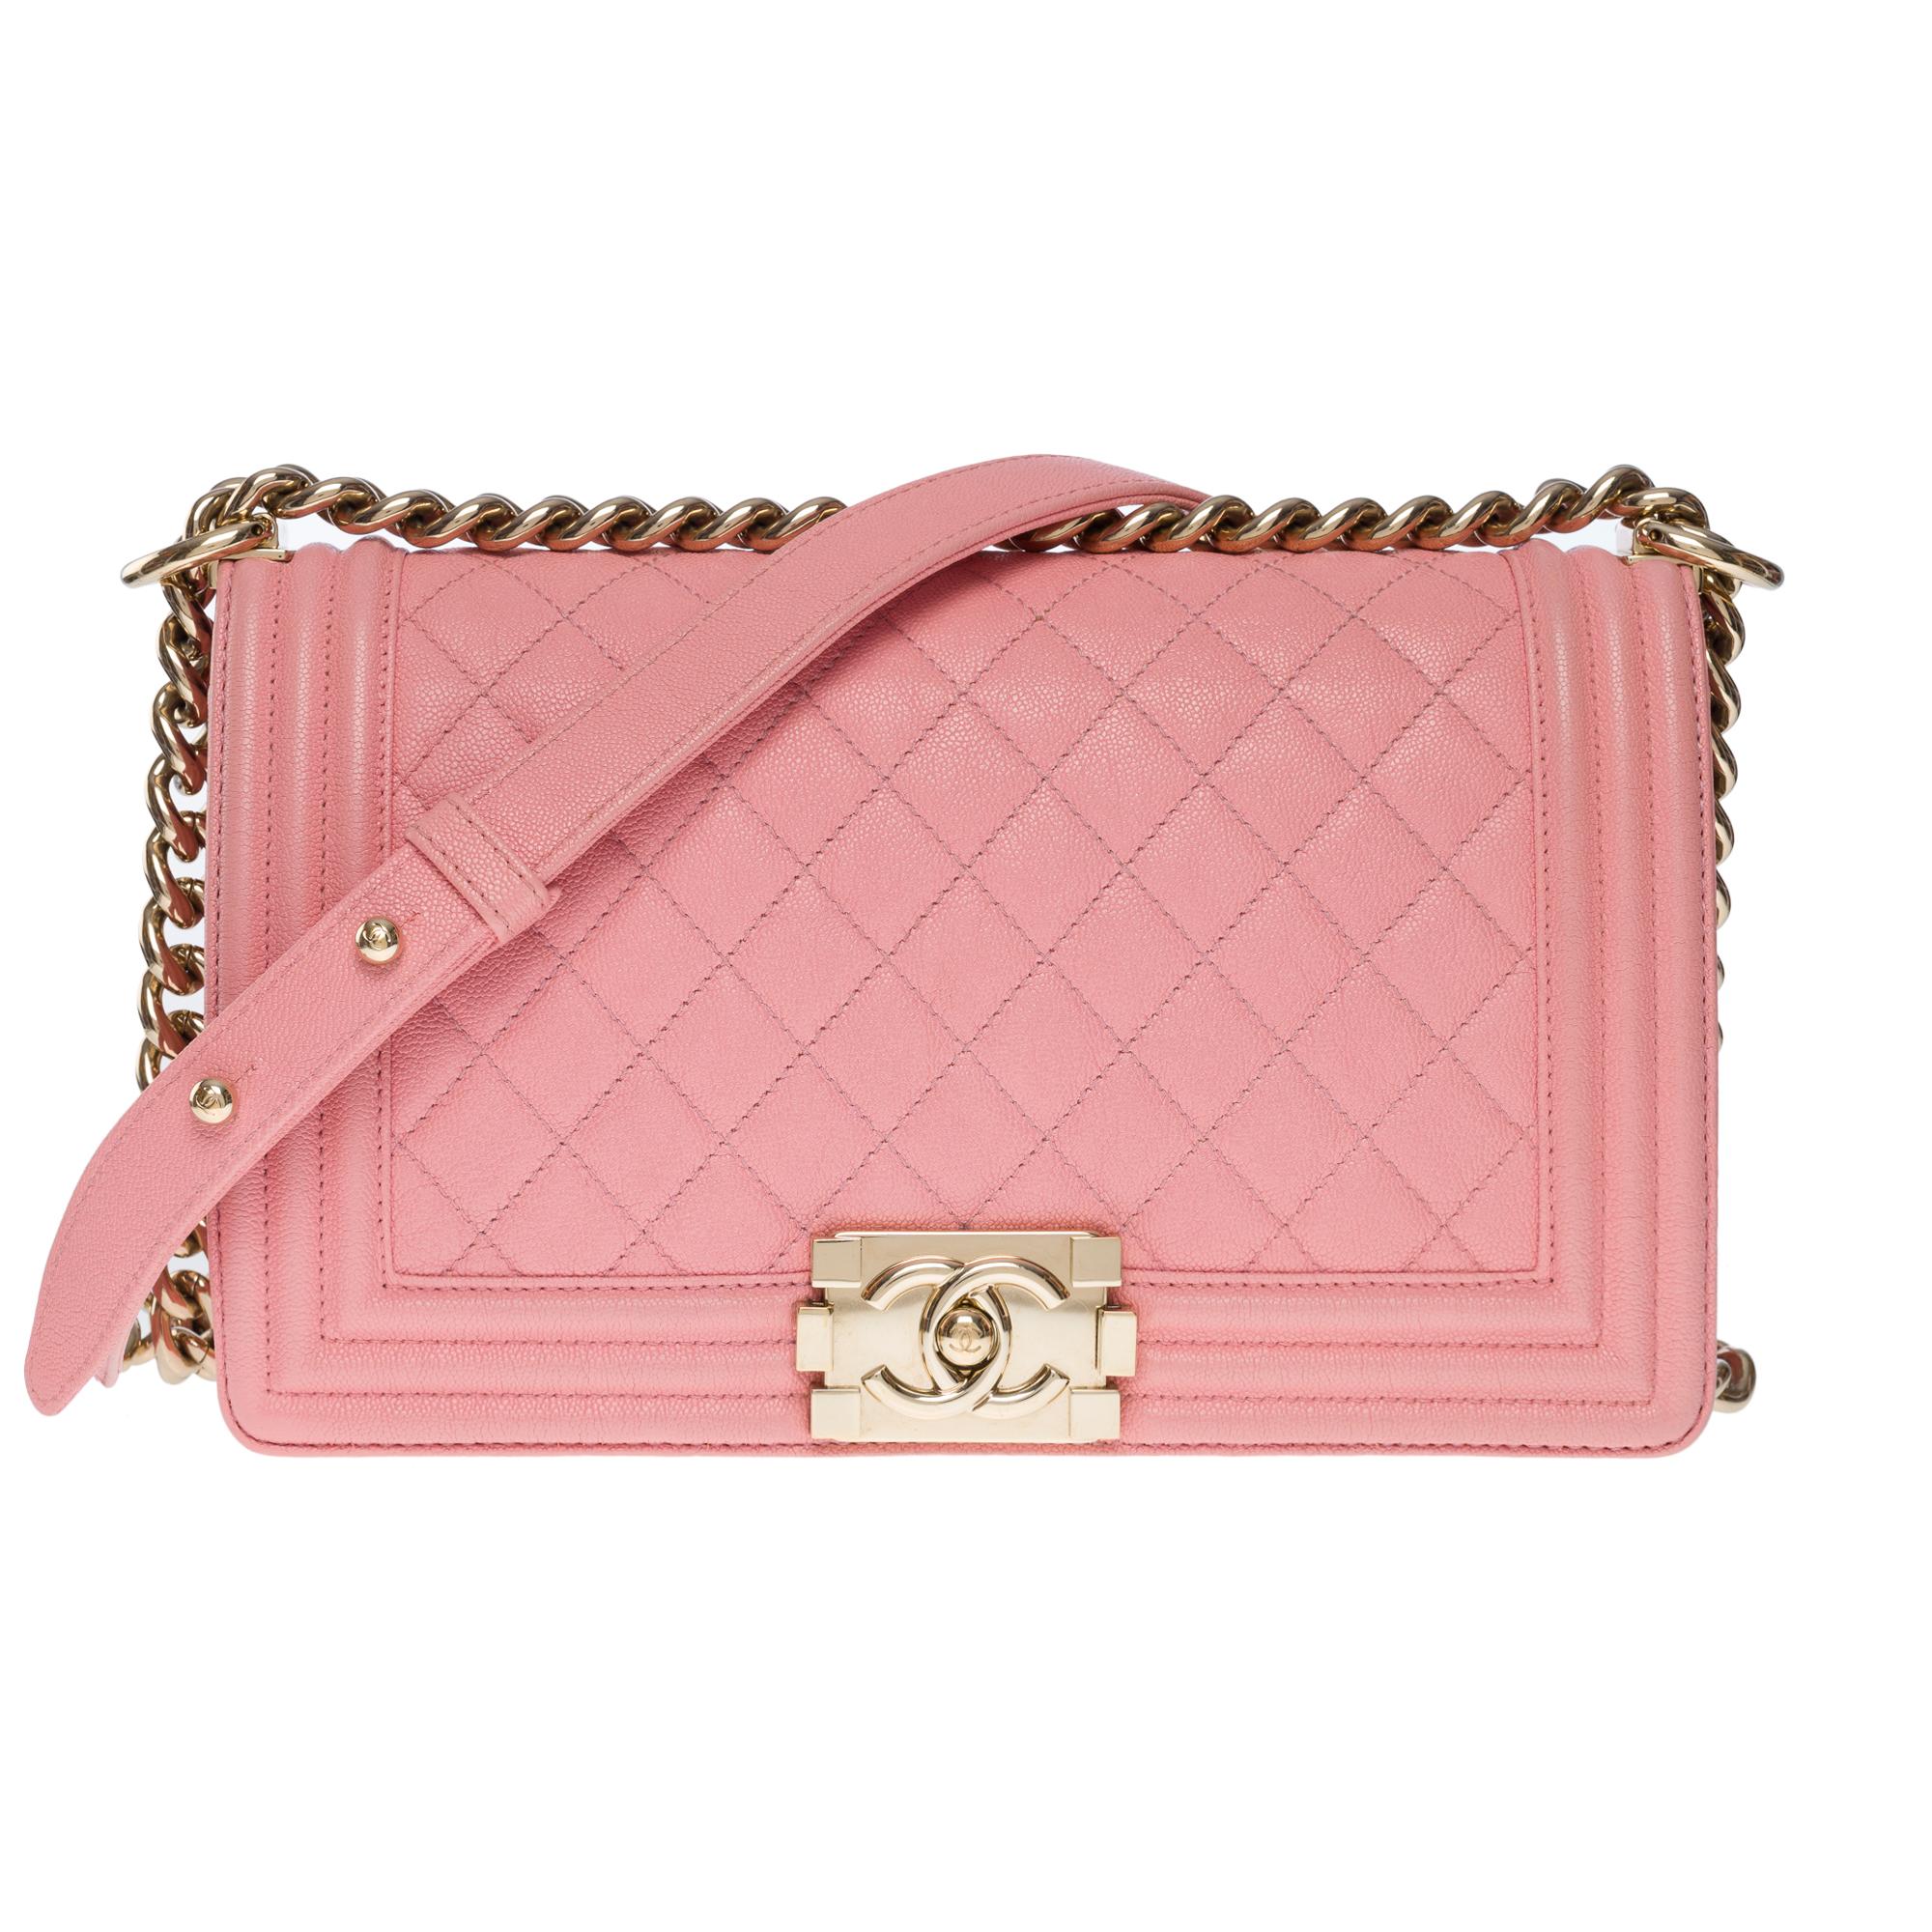 The iconic Chanel Boy old medium shoulder bag in pink quilted caviar leather, silver metal hardware, an adjustable silver metal chain handle for a shoulder or shoulder strap

A silver metal closure on the flap
Inner lining in pink canvas, one patch